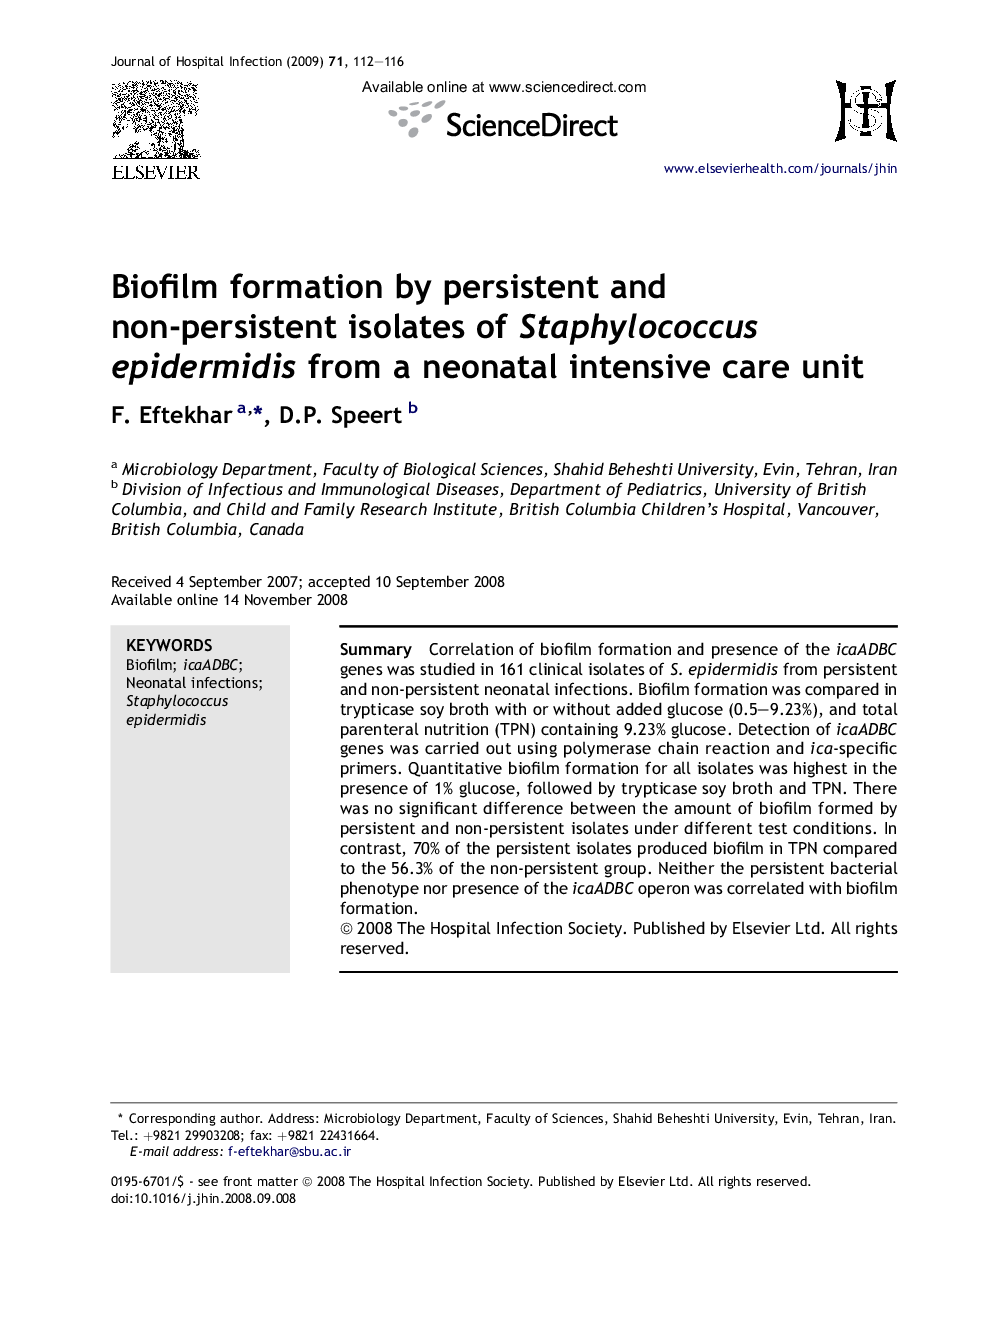 Biofilm formation by persistent and non-persistent isolates of Staphylococcus epidermidis from a neonatal intensive care unit